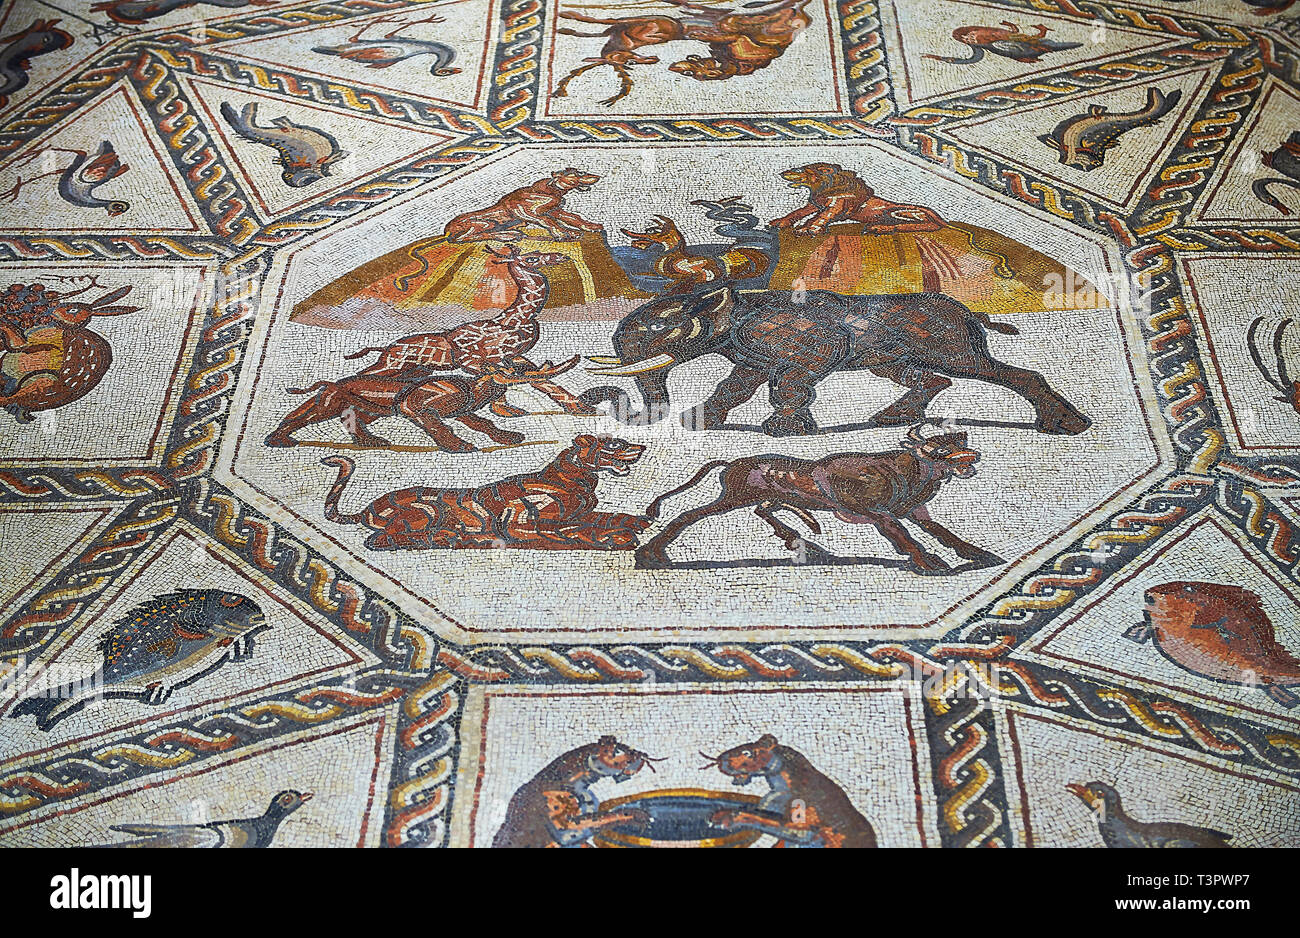 https://c8.alamy.com/comp/T3PWP7/african-animals-and-fish-from-the-3rd-century-roman-mosaic-villa-floor-from-lod-near-tel-aviv-israel-the-roman-floor-mosaic-of-lod-is-the-largest-a-T3PWP7.jpg